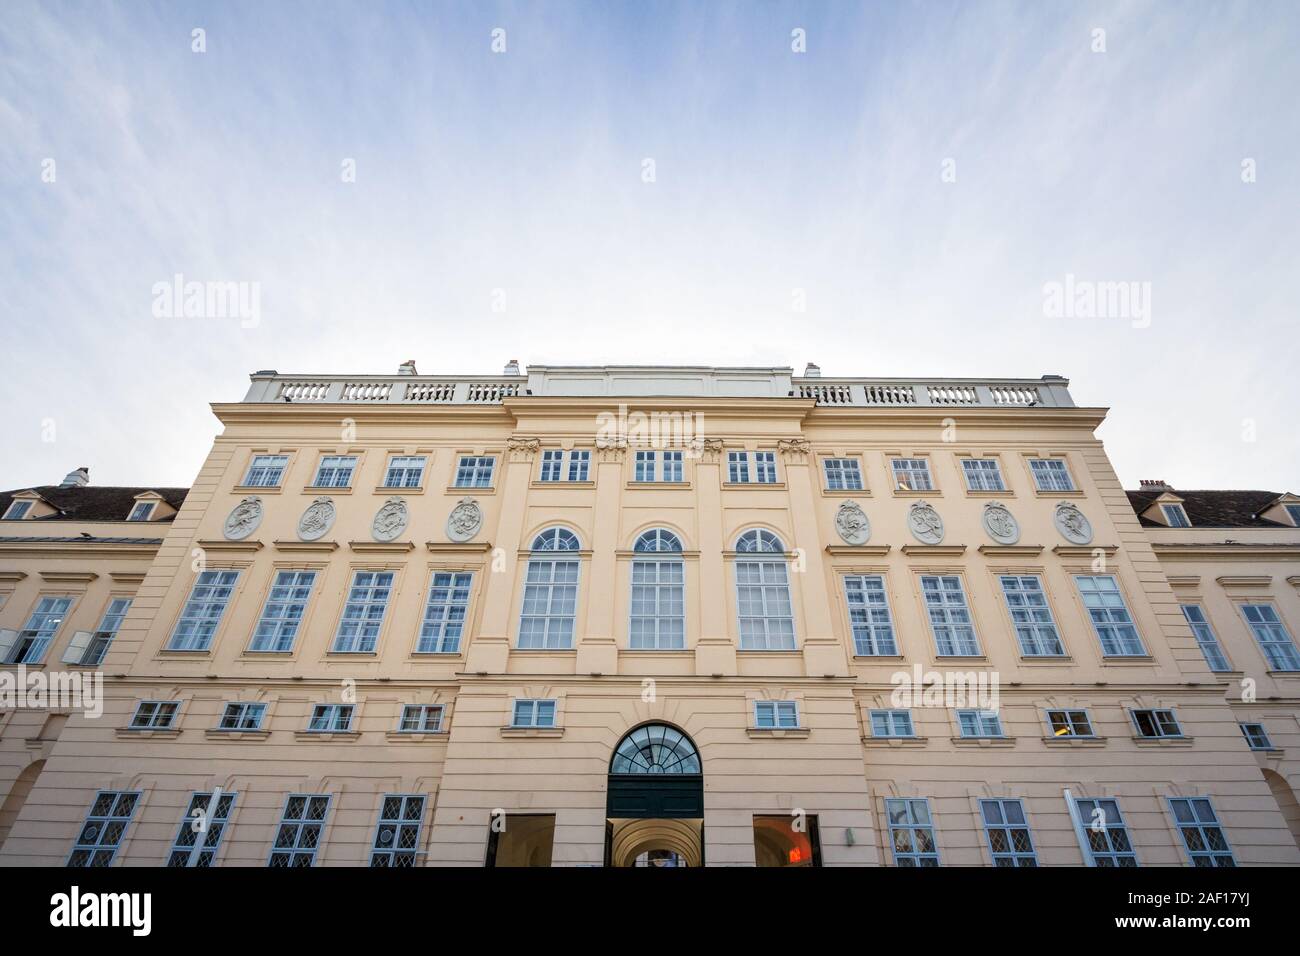 Hofstallung facade, the main entrance to the Museumsquartier in Vienna. Museumsquartier is the main area of Vienna contaning Art museums, with a typic Stock Photo